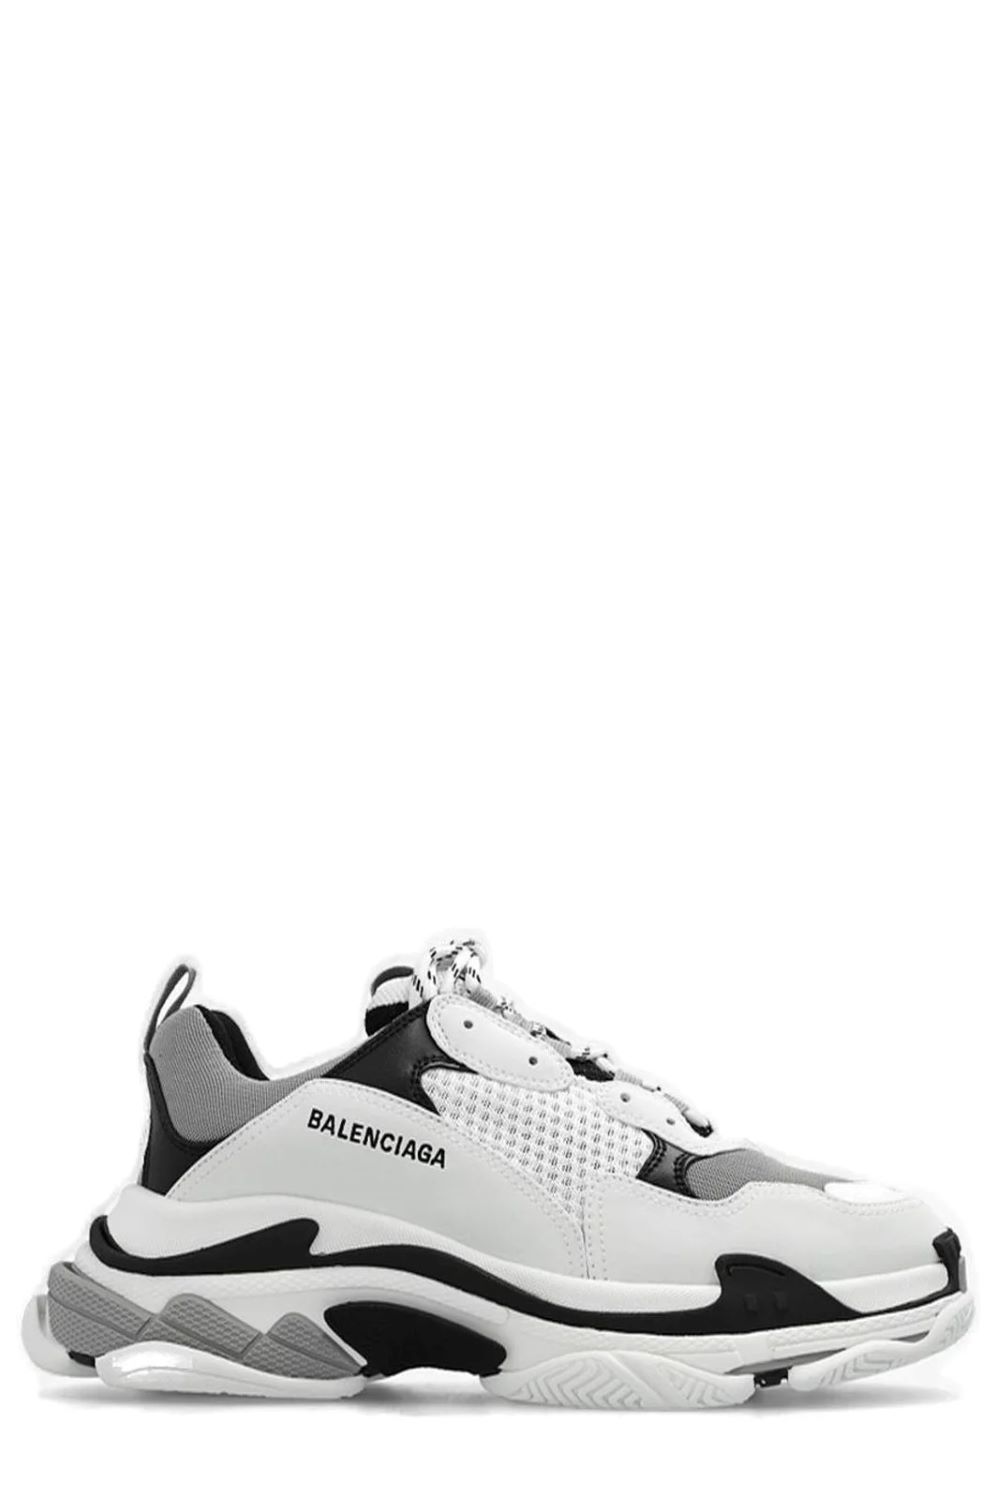 Buy Sneakers Balenciaga Triple S lace-up sneakers (536737W2FW5) | Luxury online store Boutique